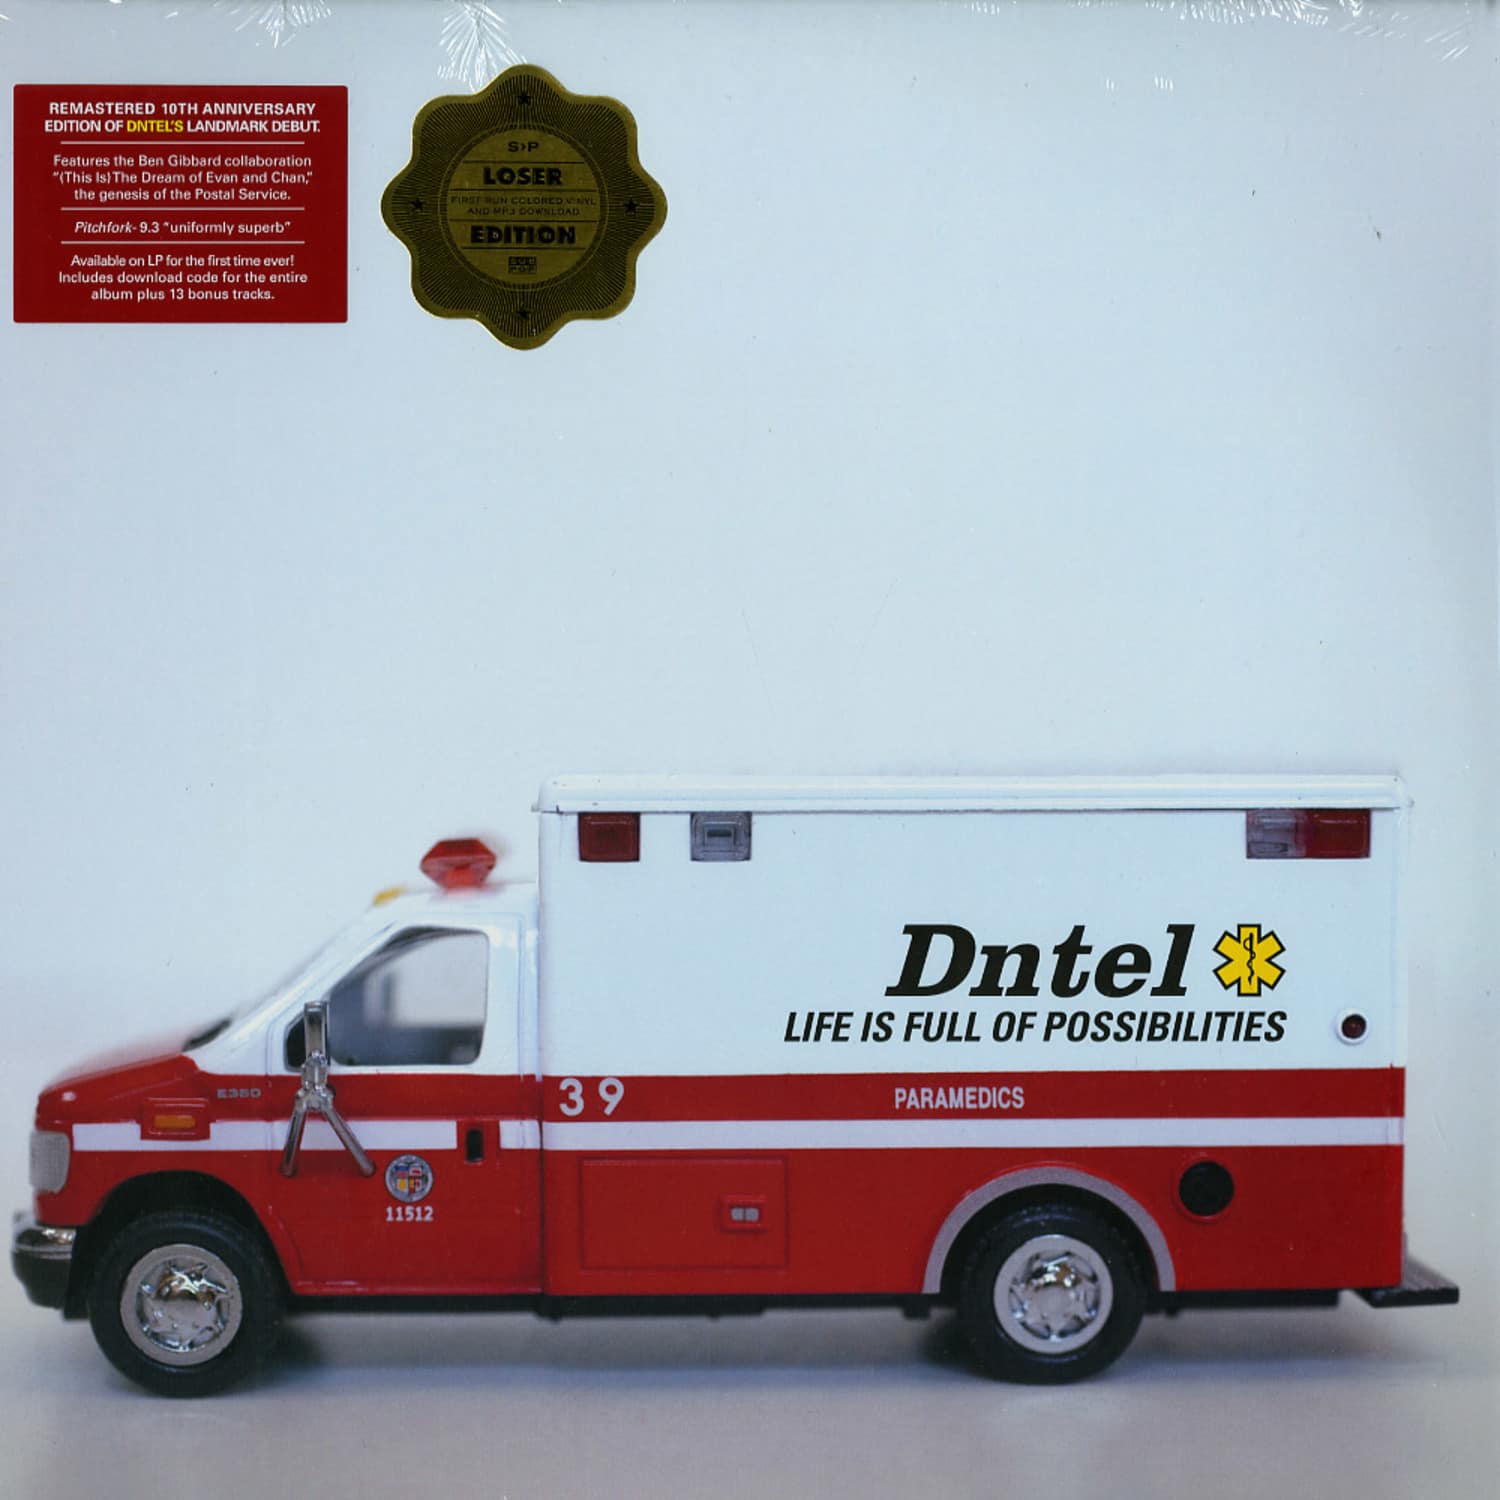 Dntel - LIFE IS FULL OF POSSIBILITIES 